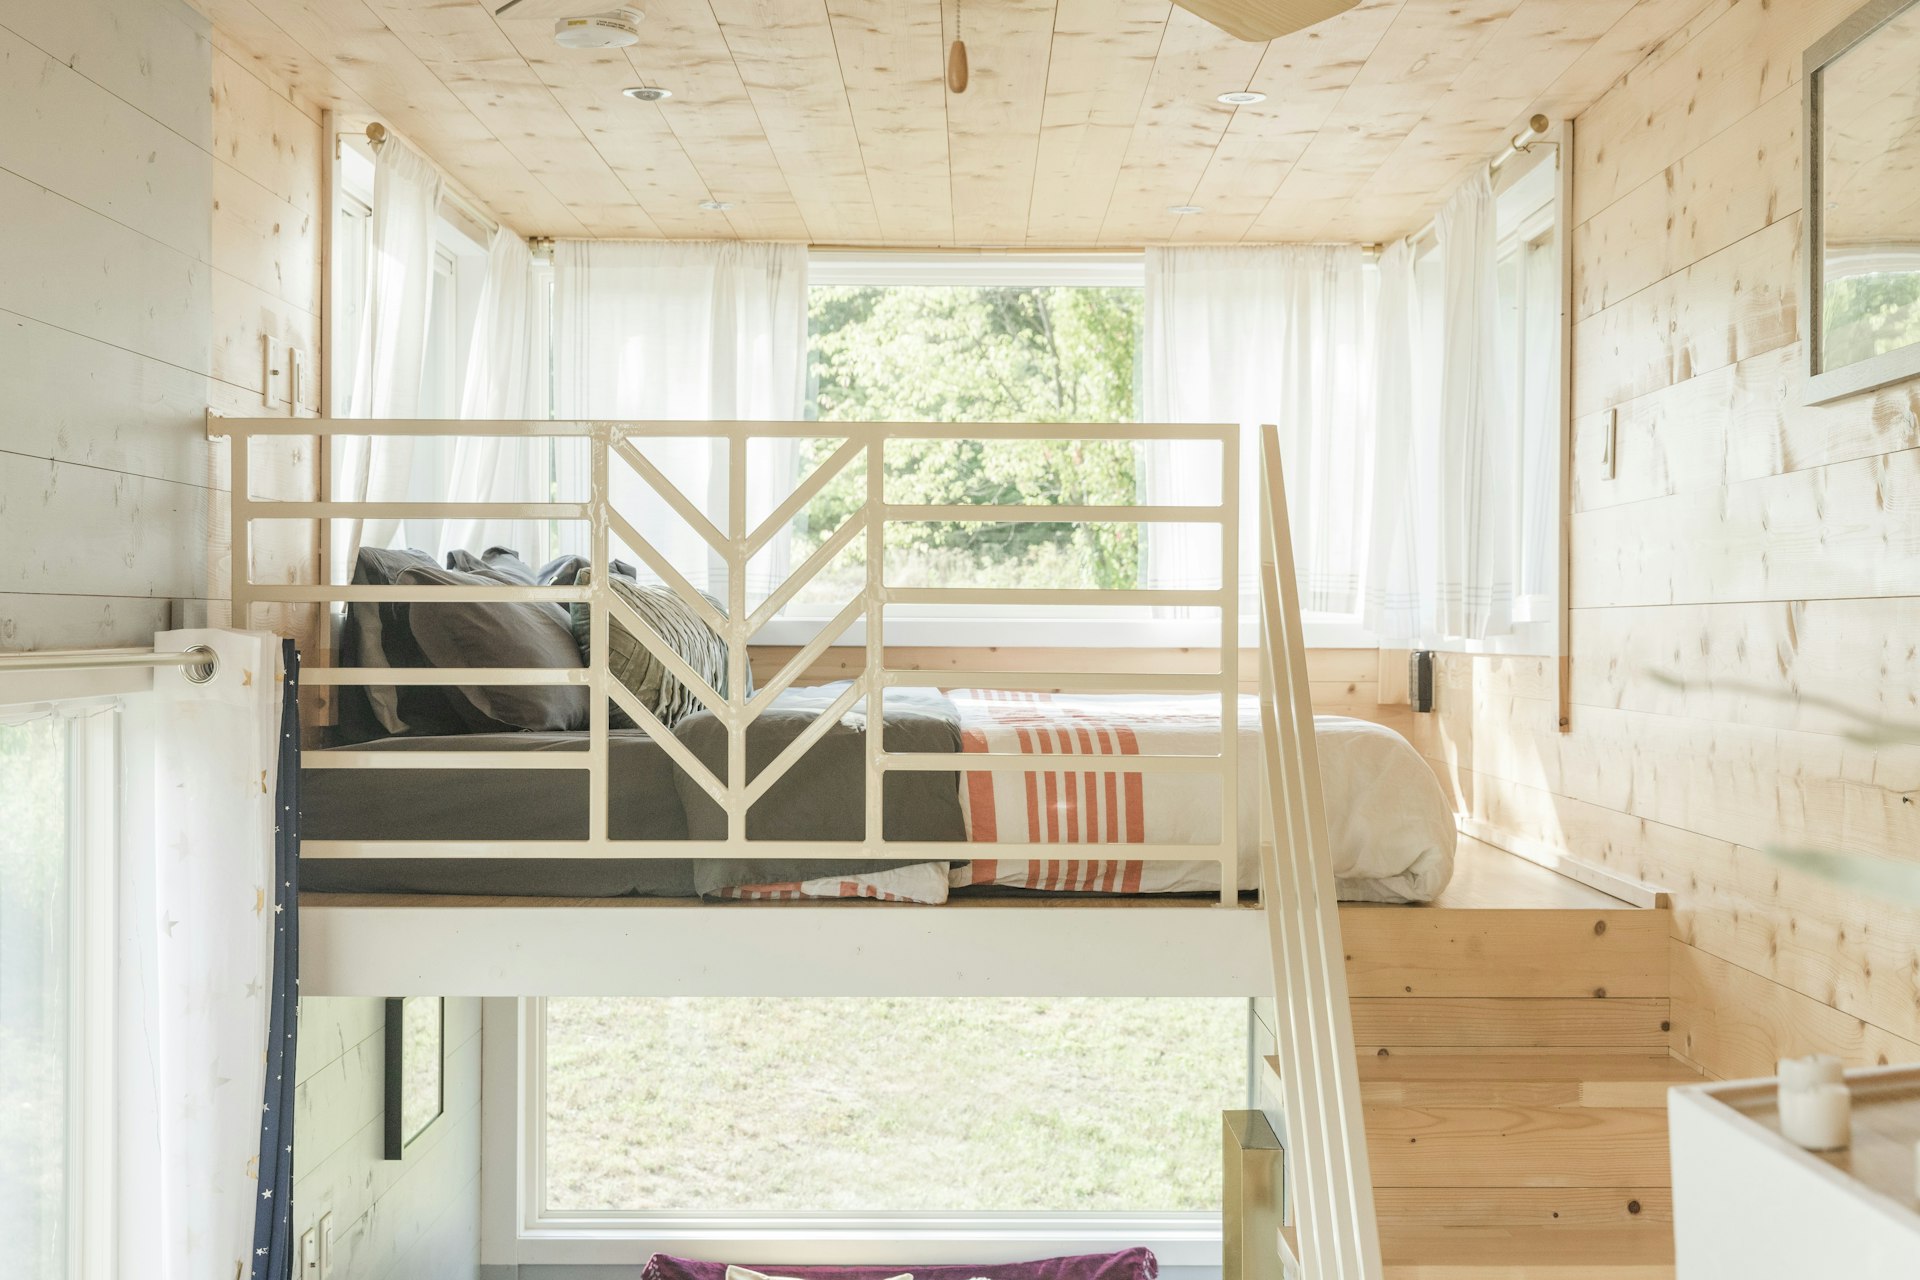 Lofted bedroom in open-plan tiny wooden home